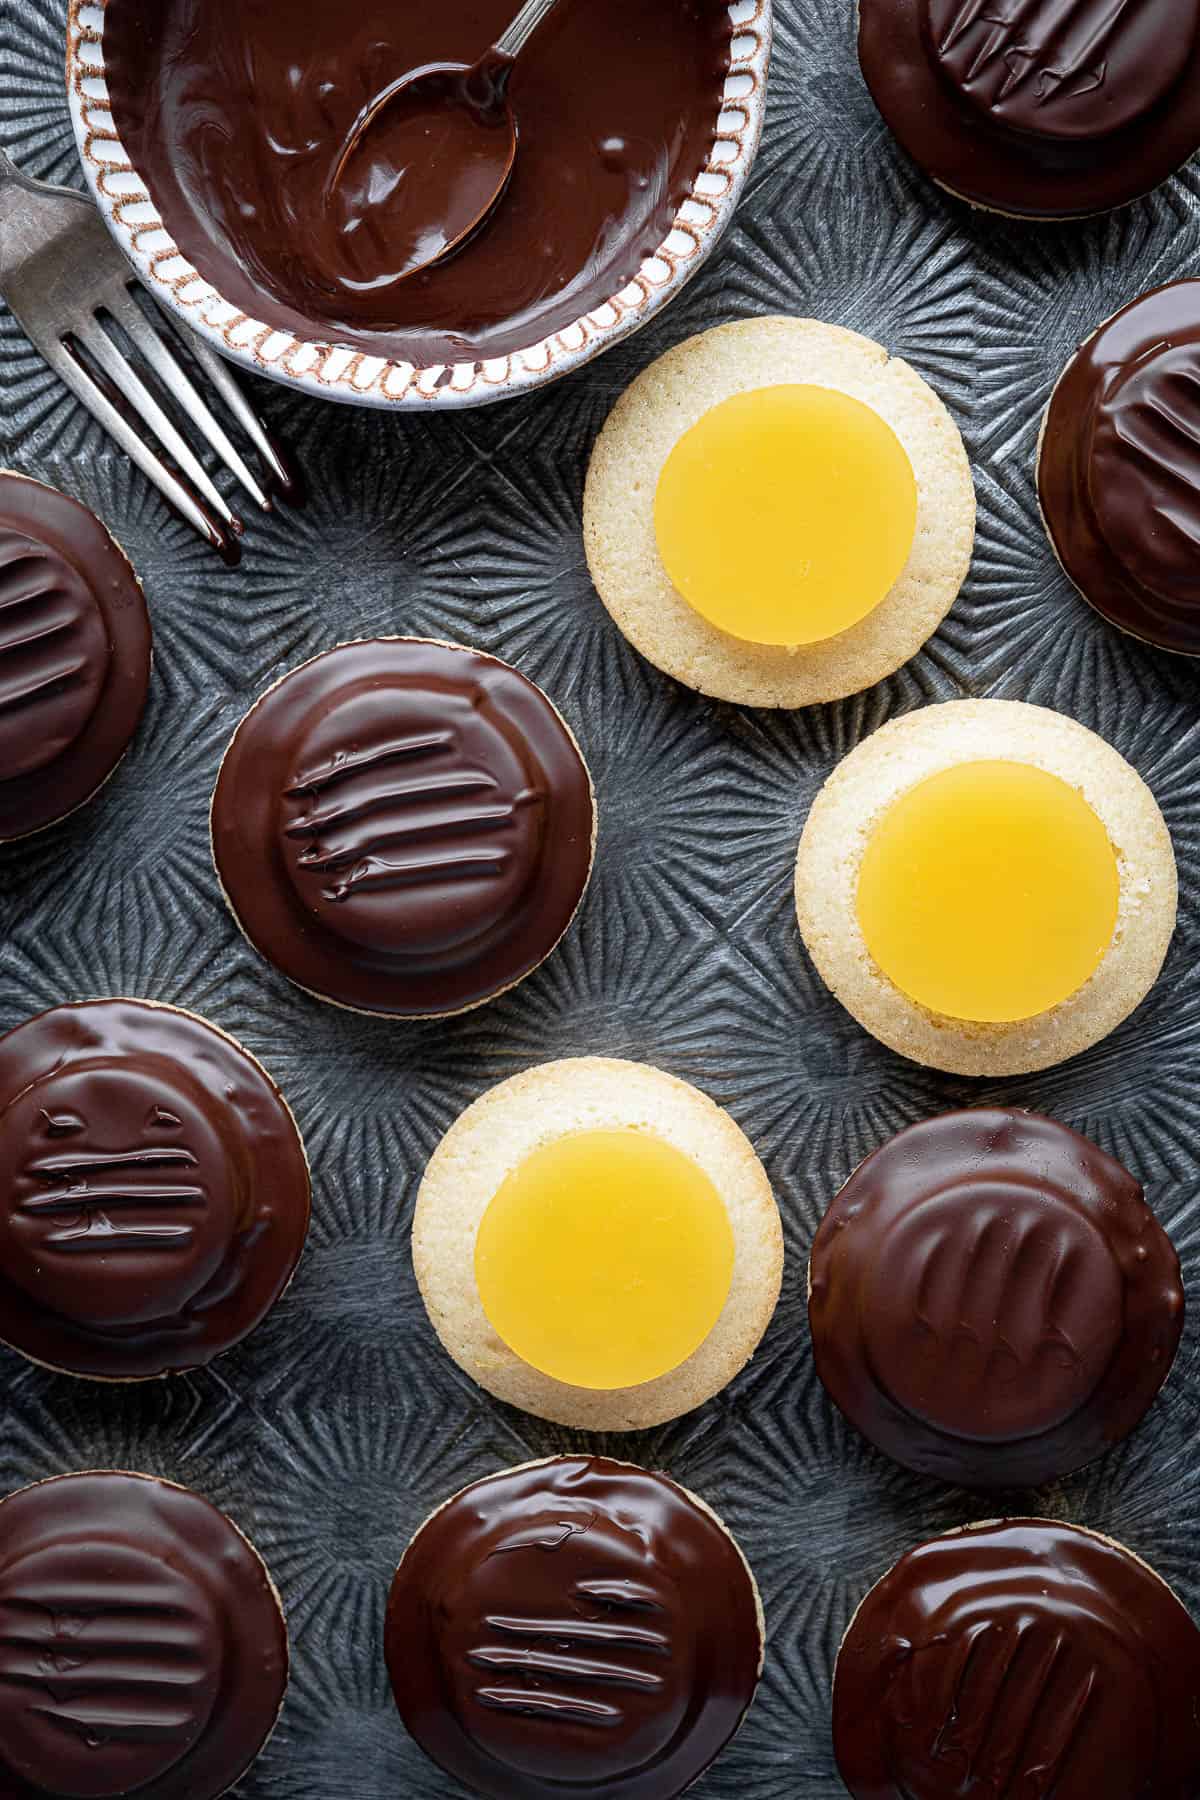 Close up of jaffa cakes, some not yet coated in chocolate.